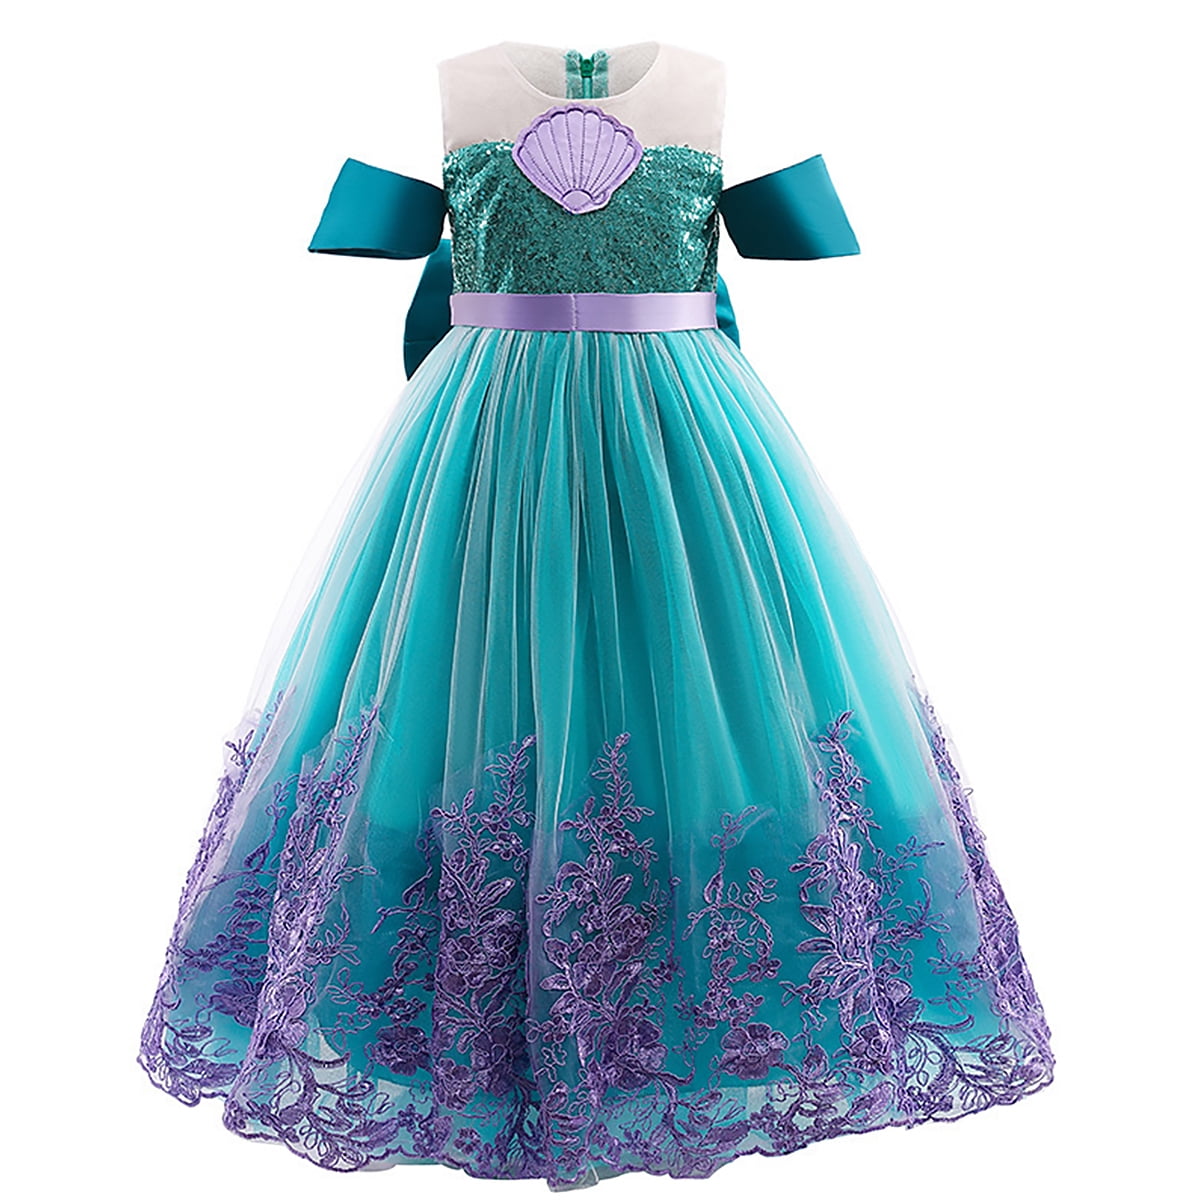 Girls Luxury Official Disney Boutique Ariel Mermaid Party Occasion Dress 3-10yrs 